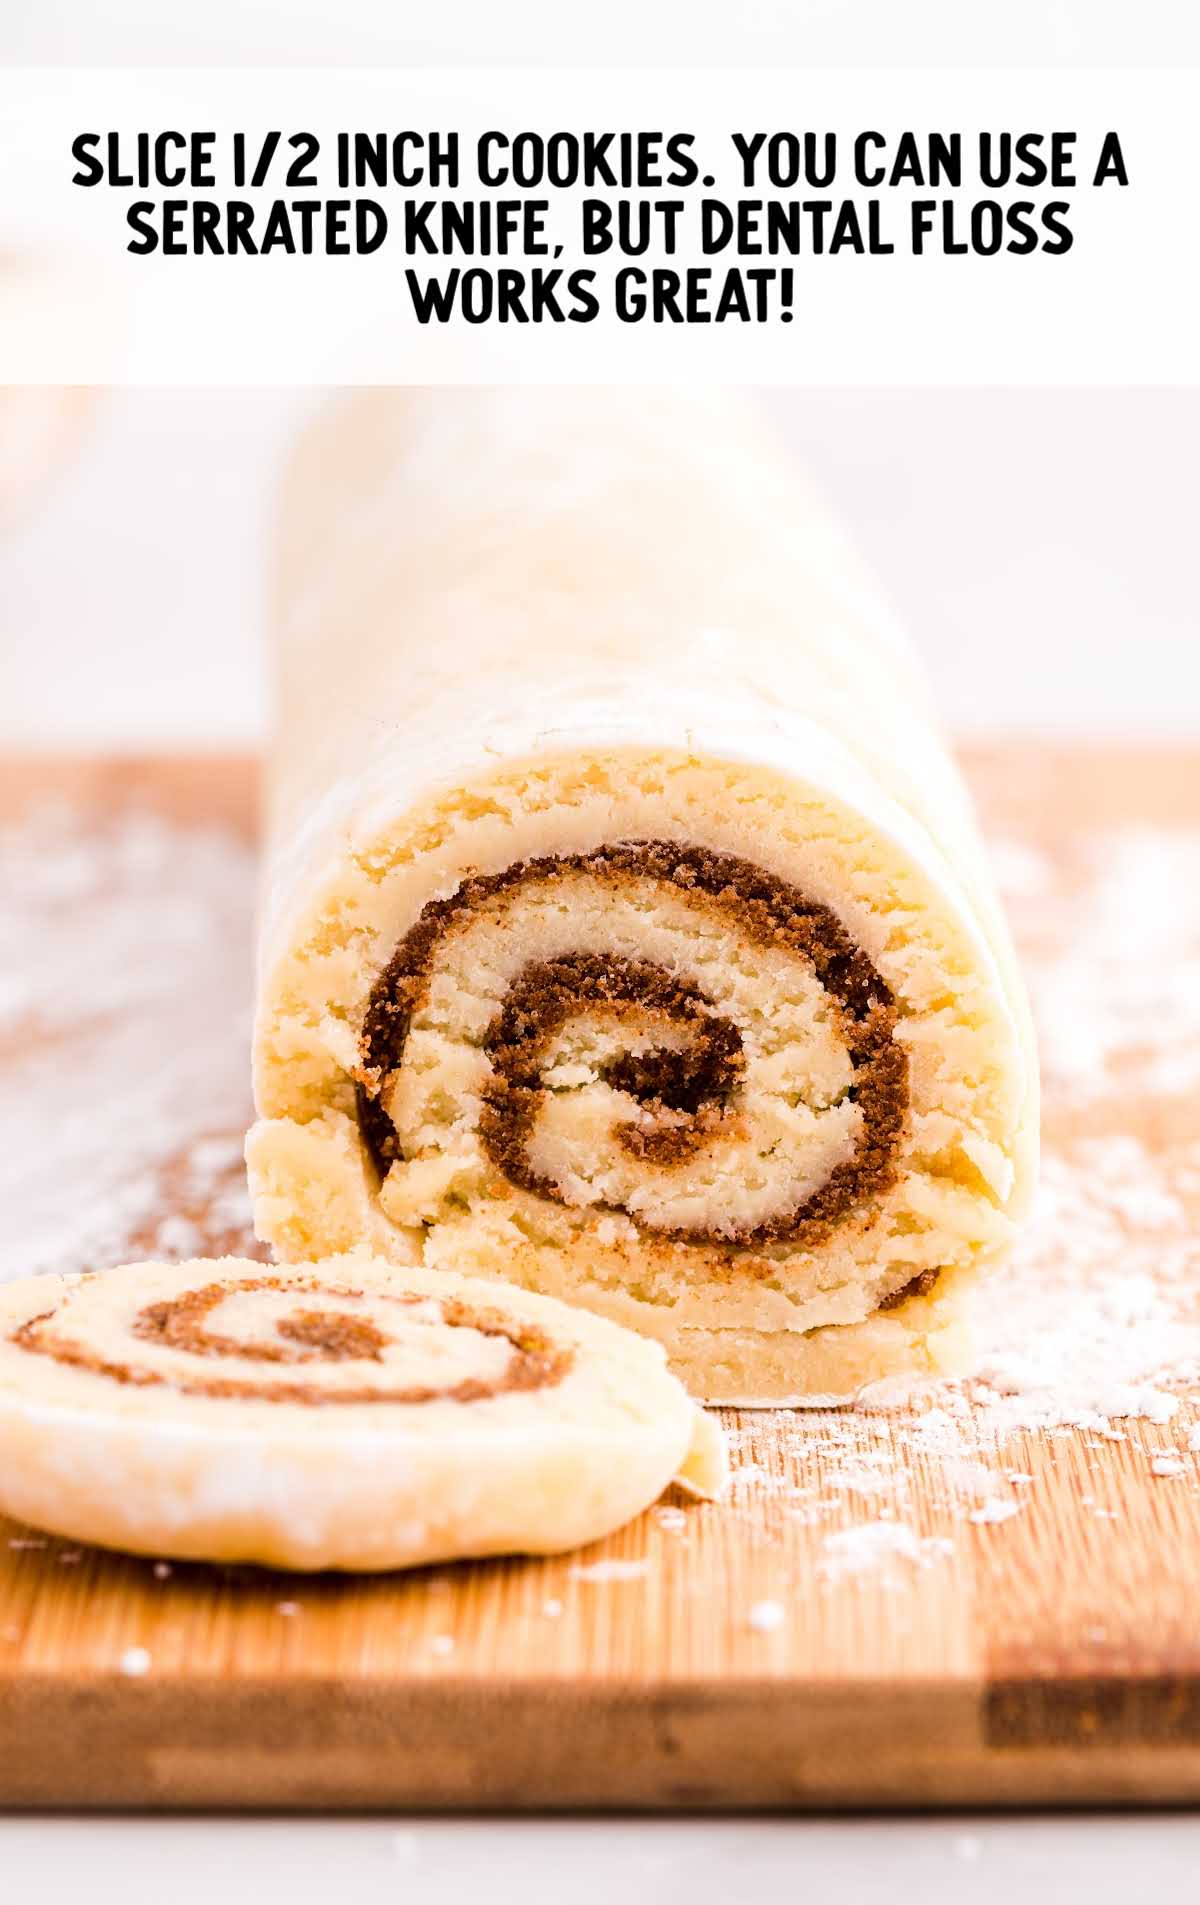 cookies sliced from the rolled up dough using a knife